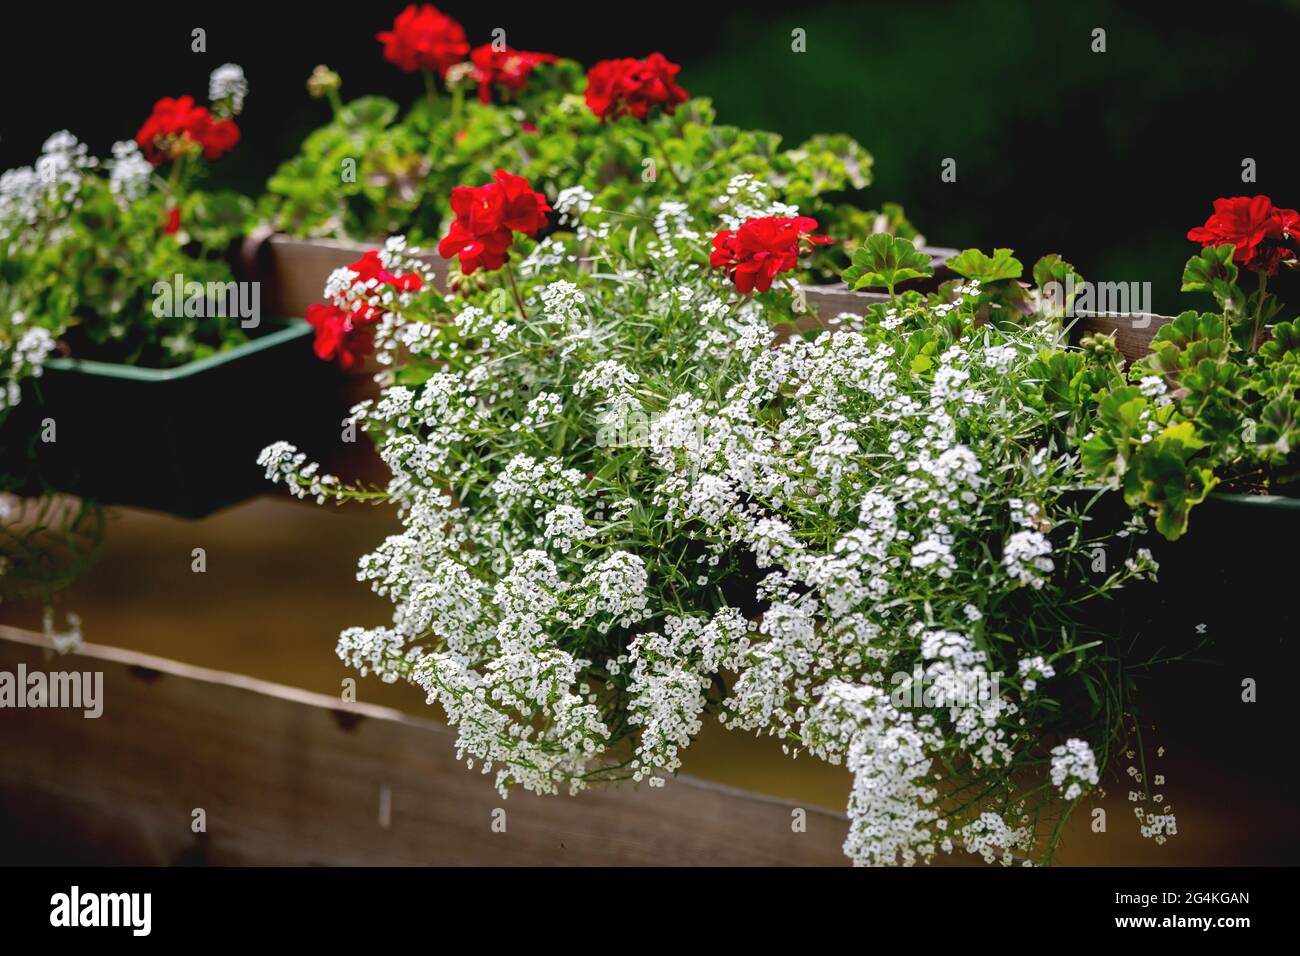 Pot with red and white flowers on a fence in garden, summertime Stock Photo